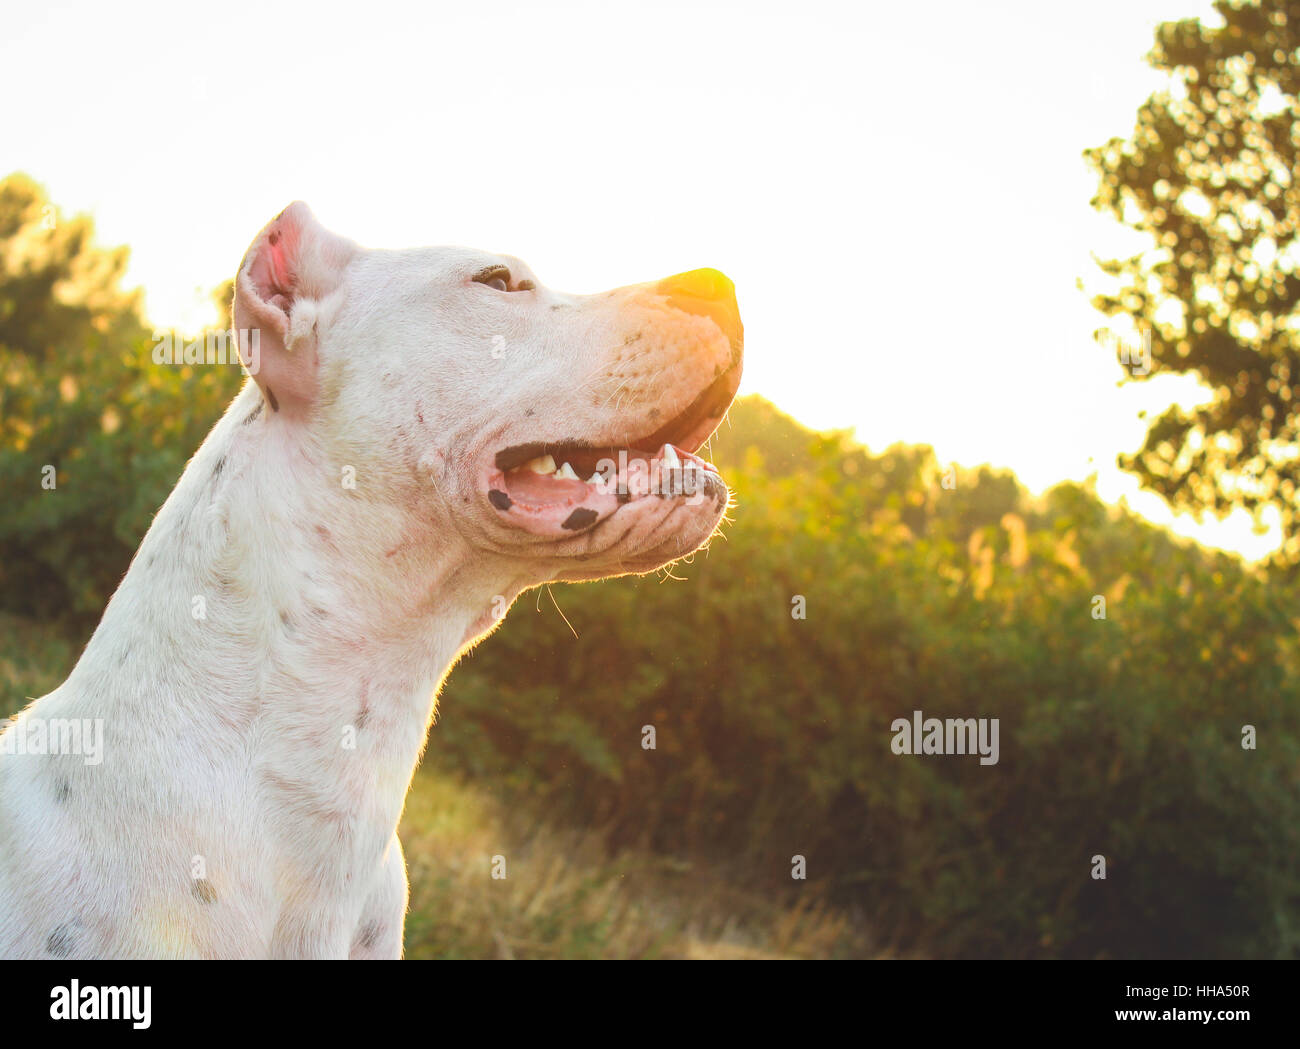 White Dogo Argentino dog surrounded by trees in a grassland field. Stock Photo